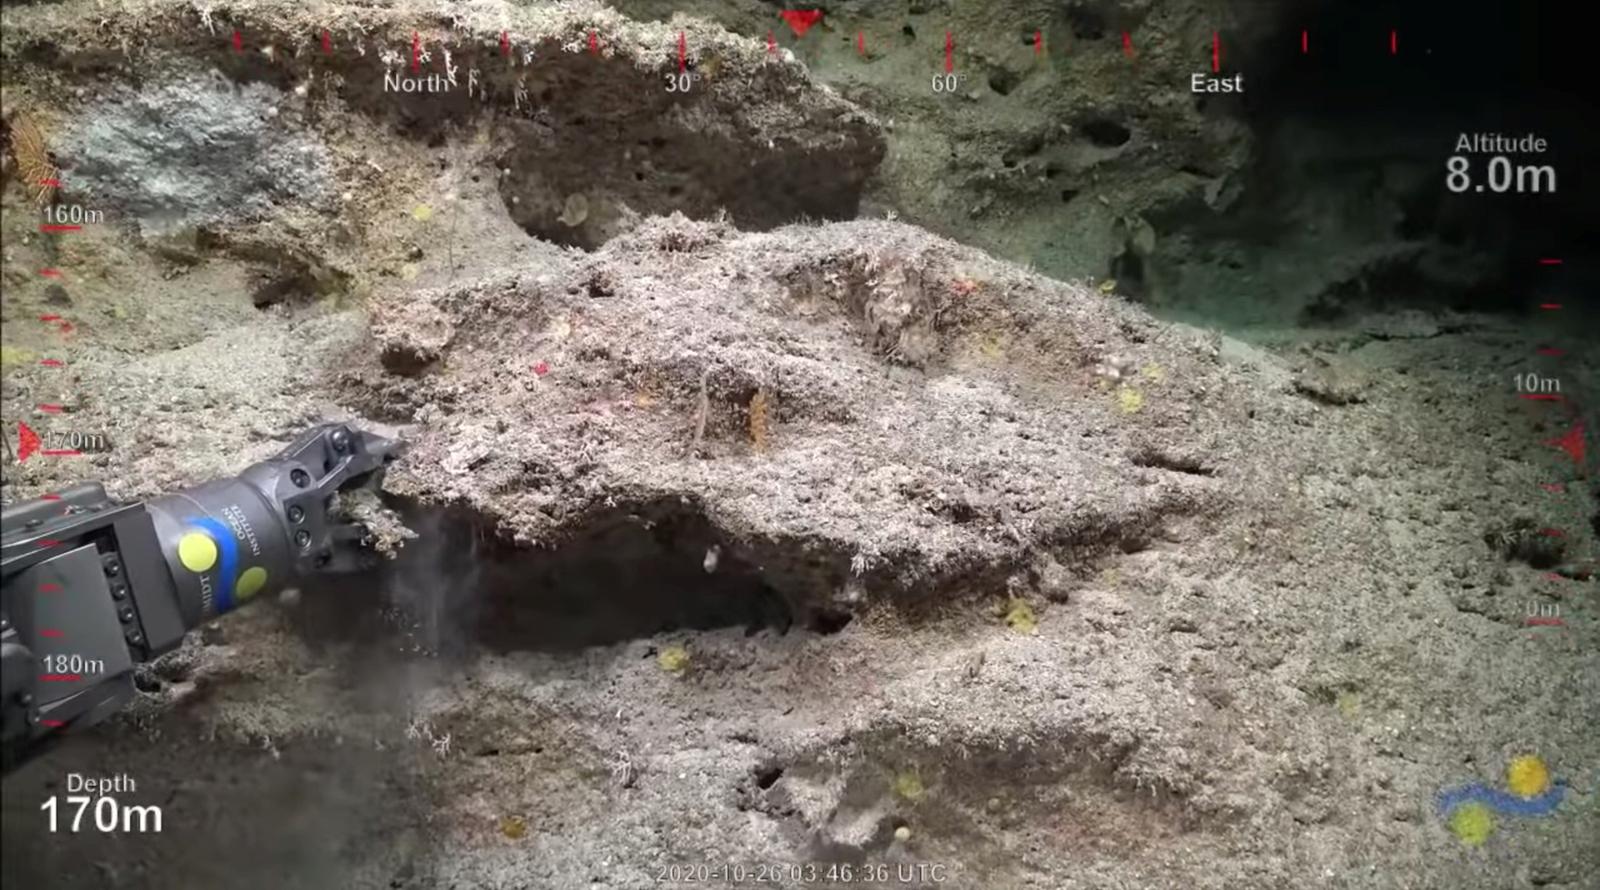 A robotic arm takes rock samples from a 500-metre-tall coral reef discovered by Australian scientists, off Australia's Great Barrier Reef, in this still image taken from video provided on social media, October 25, 2020. Mandatory credit Schmidt Ocean Institute/via Reuters